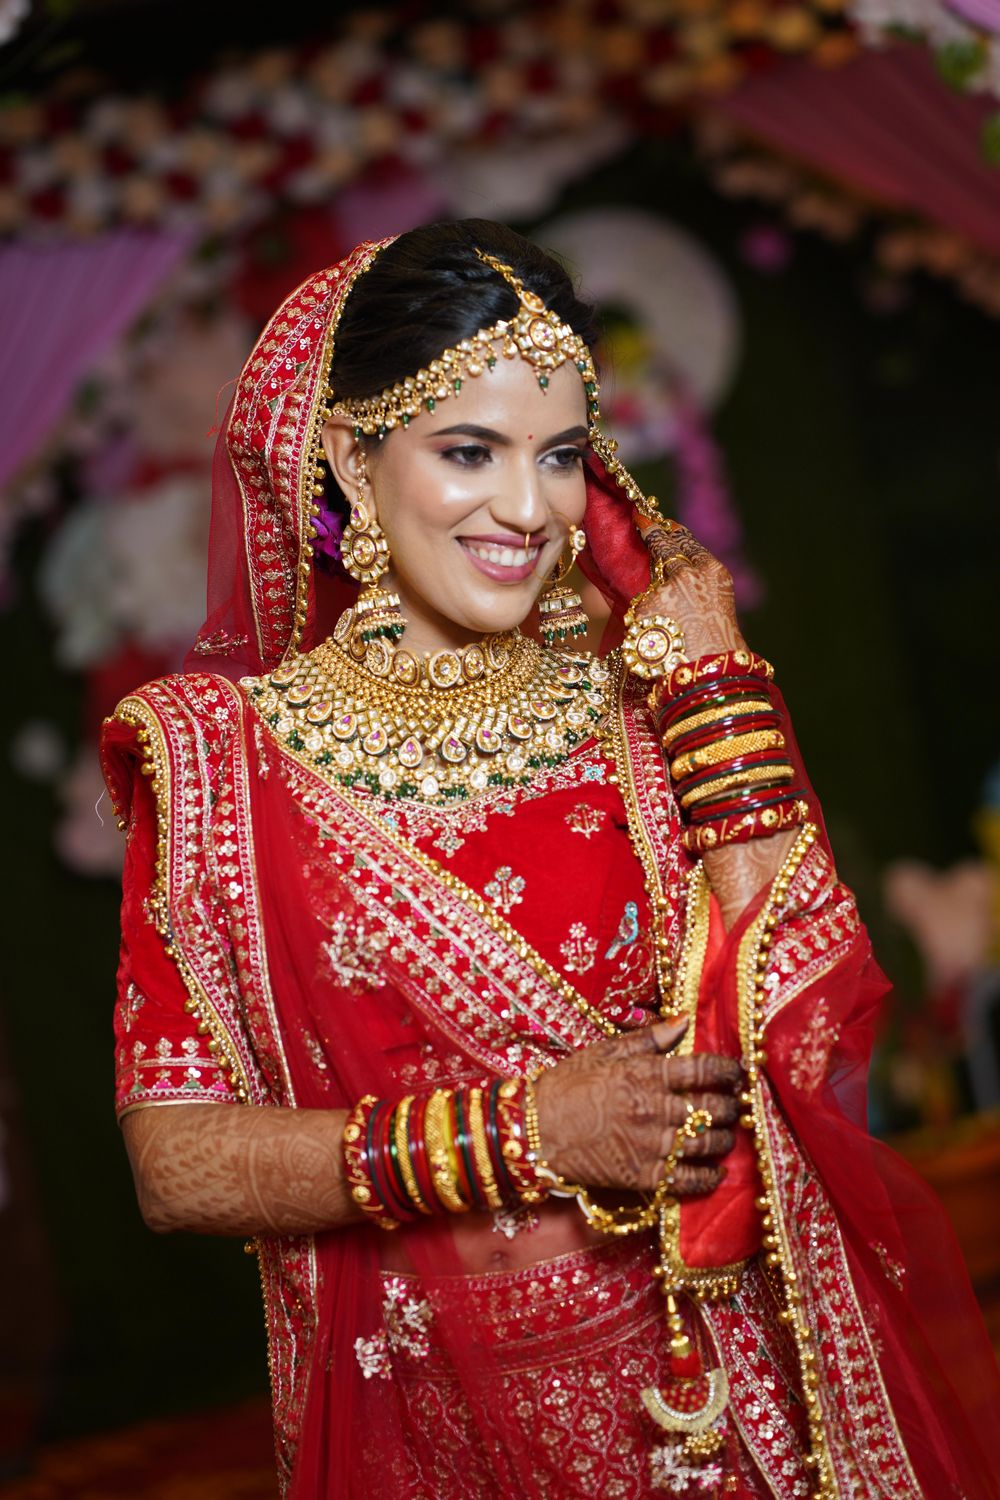 Photo From Brides - By Maitri Chheda Mua